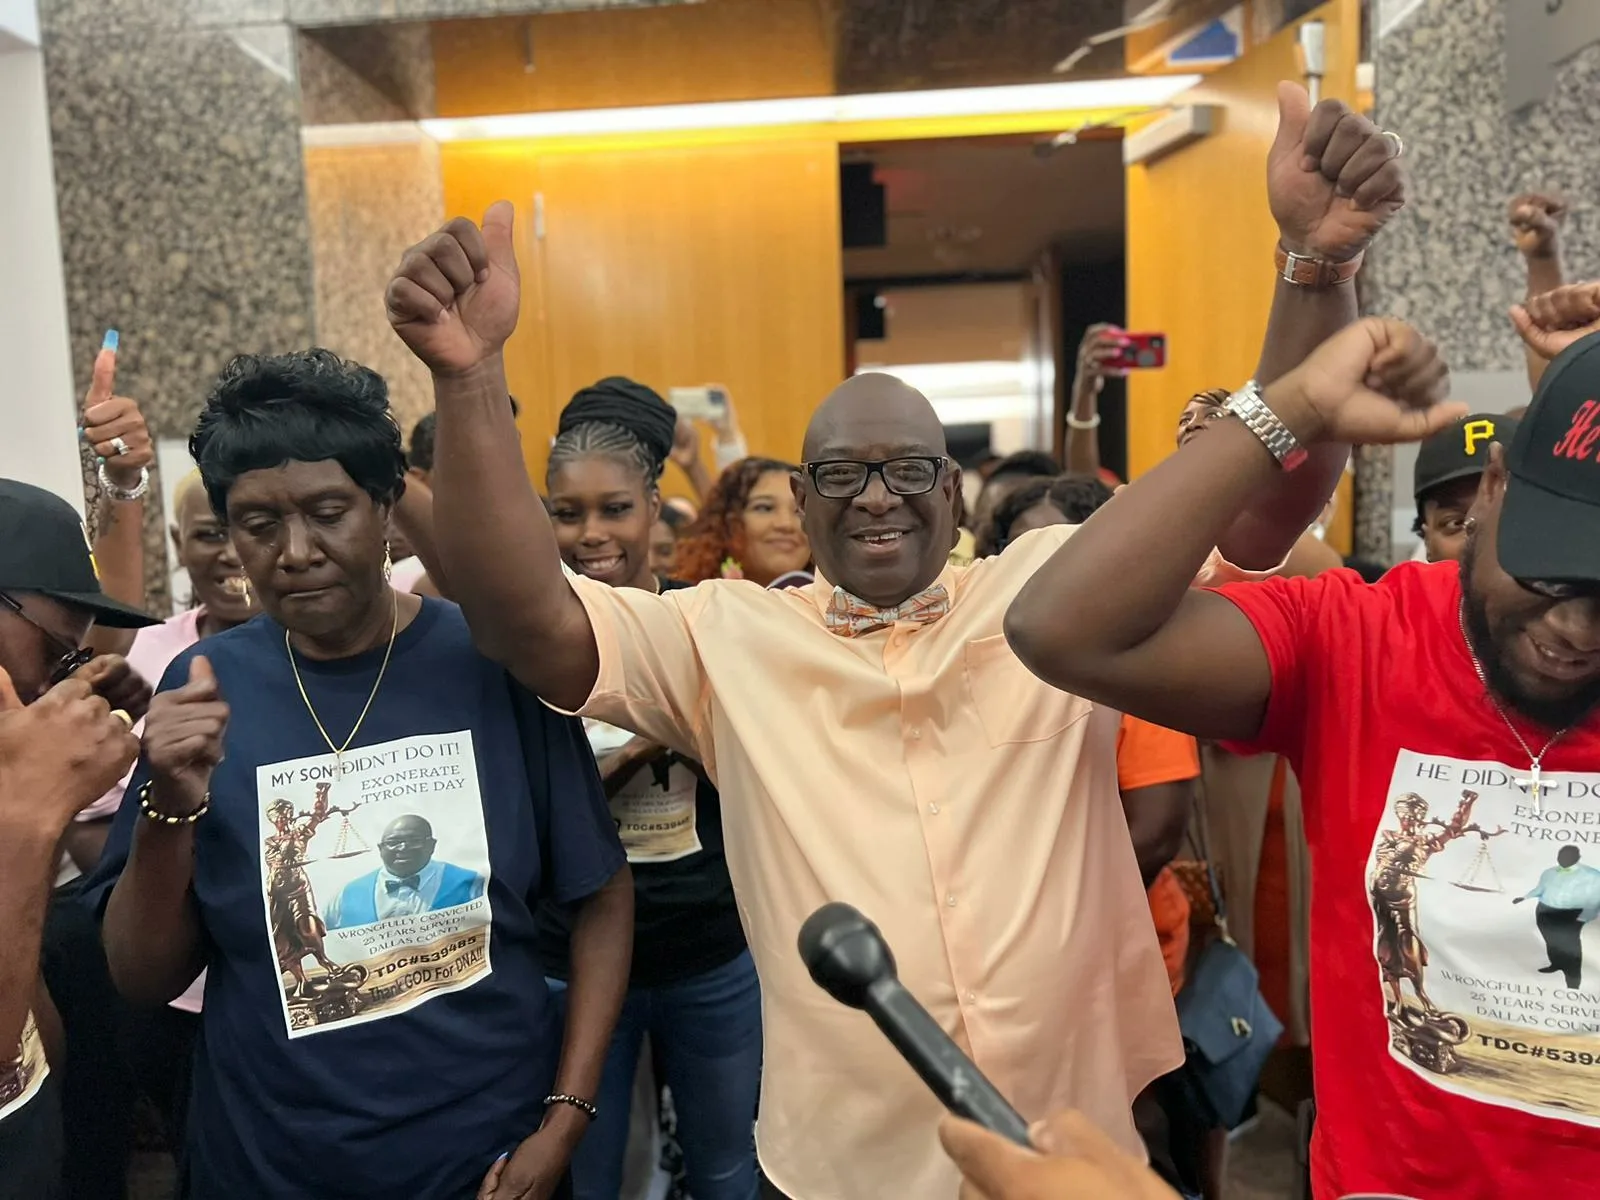 Photo: Tyrone Day is exonerated on May 24, 2023 in Dallas, TX. (Image: Alicia Maule /Innocence Project)